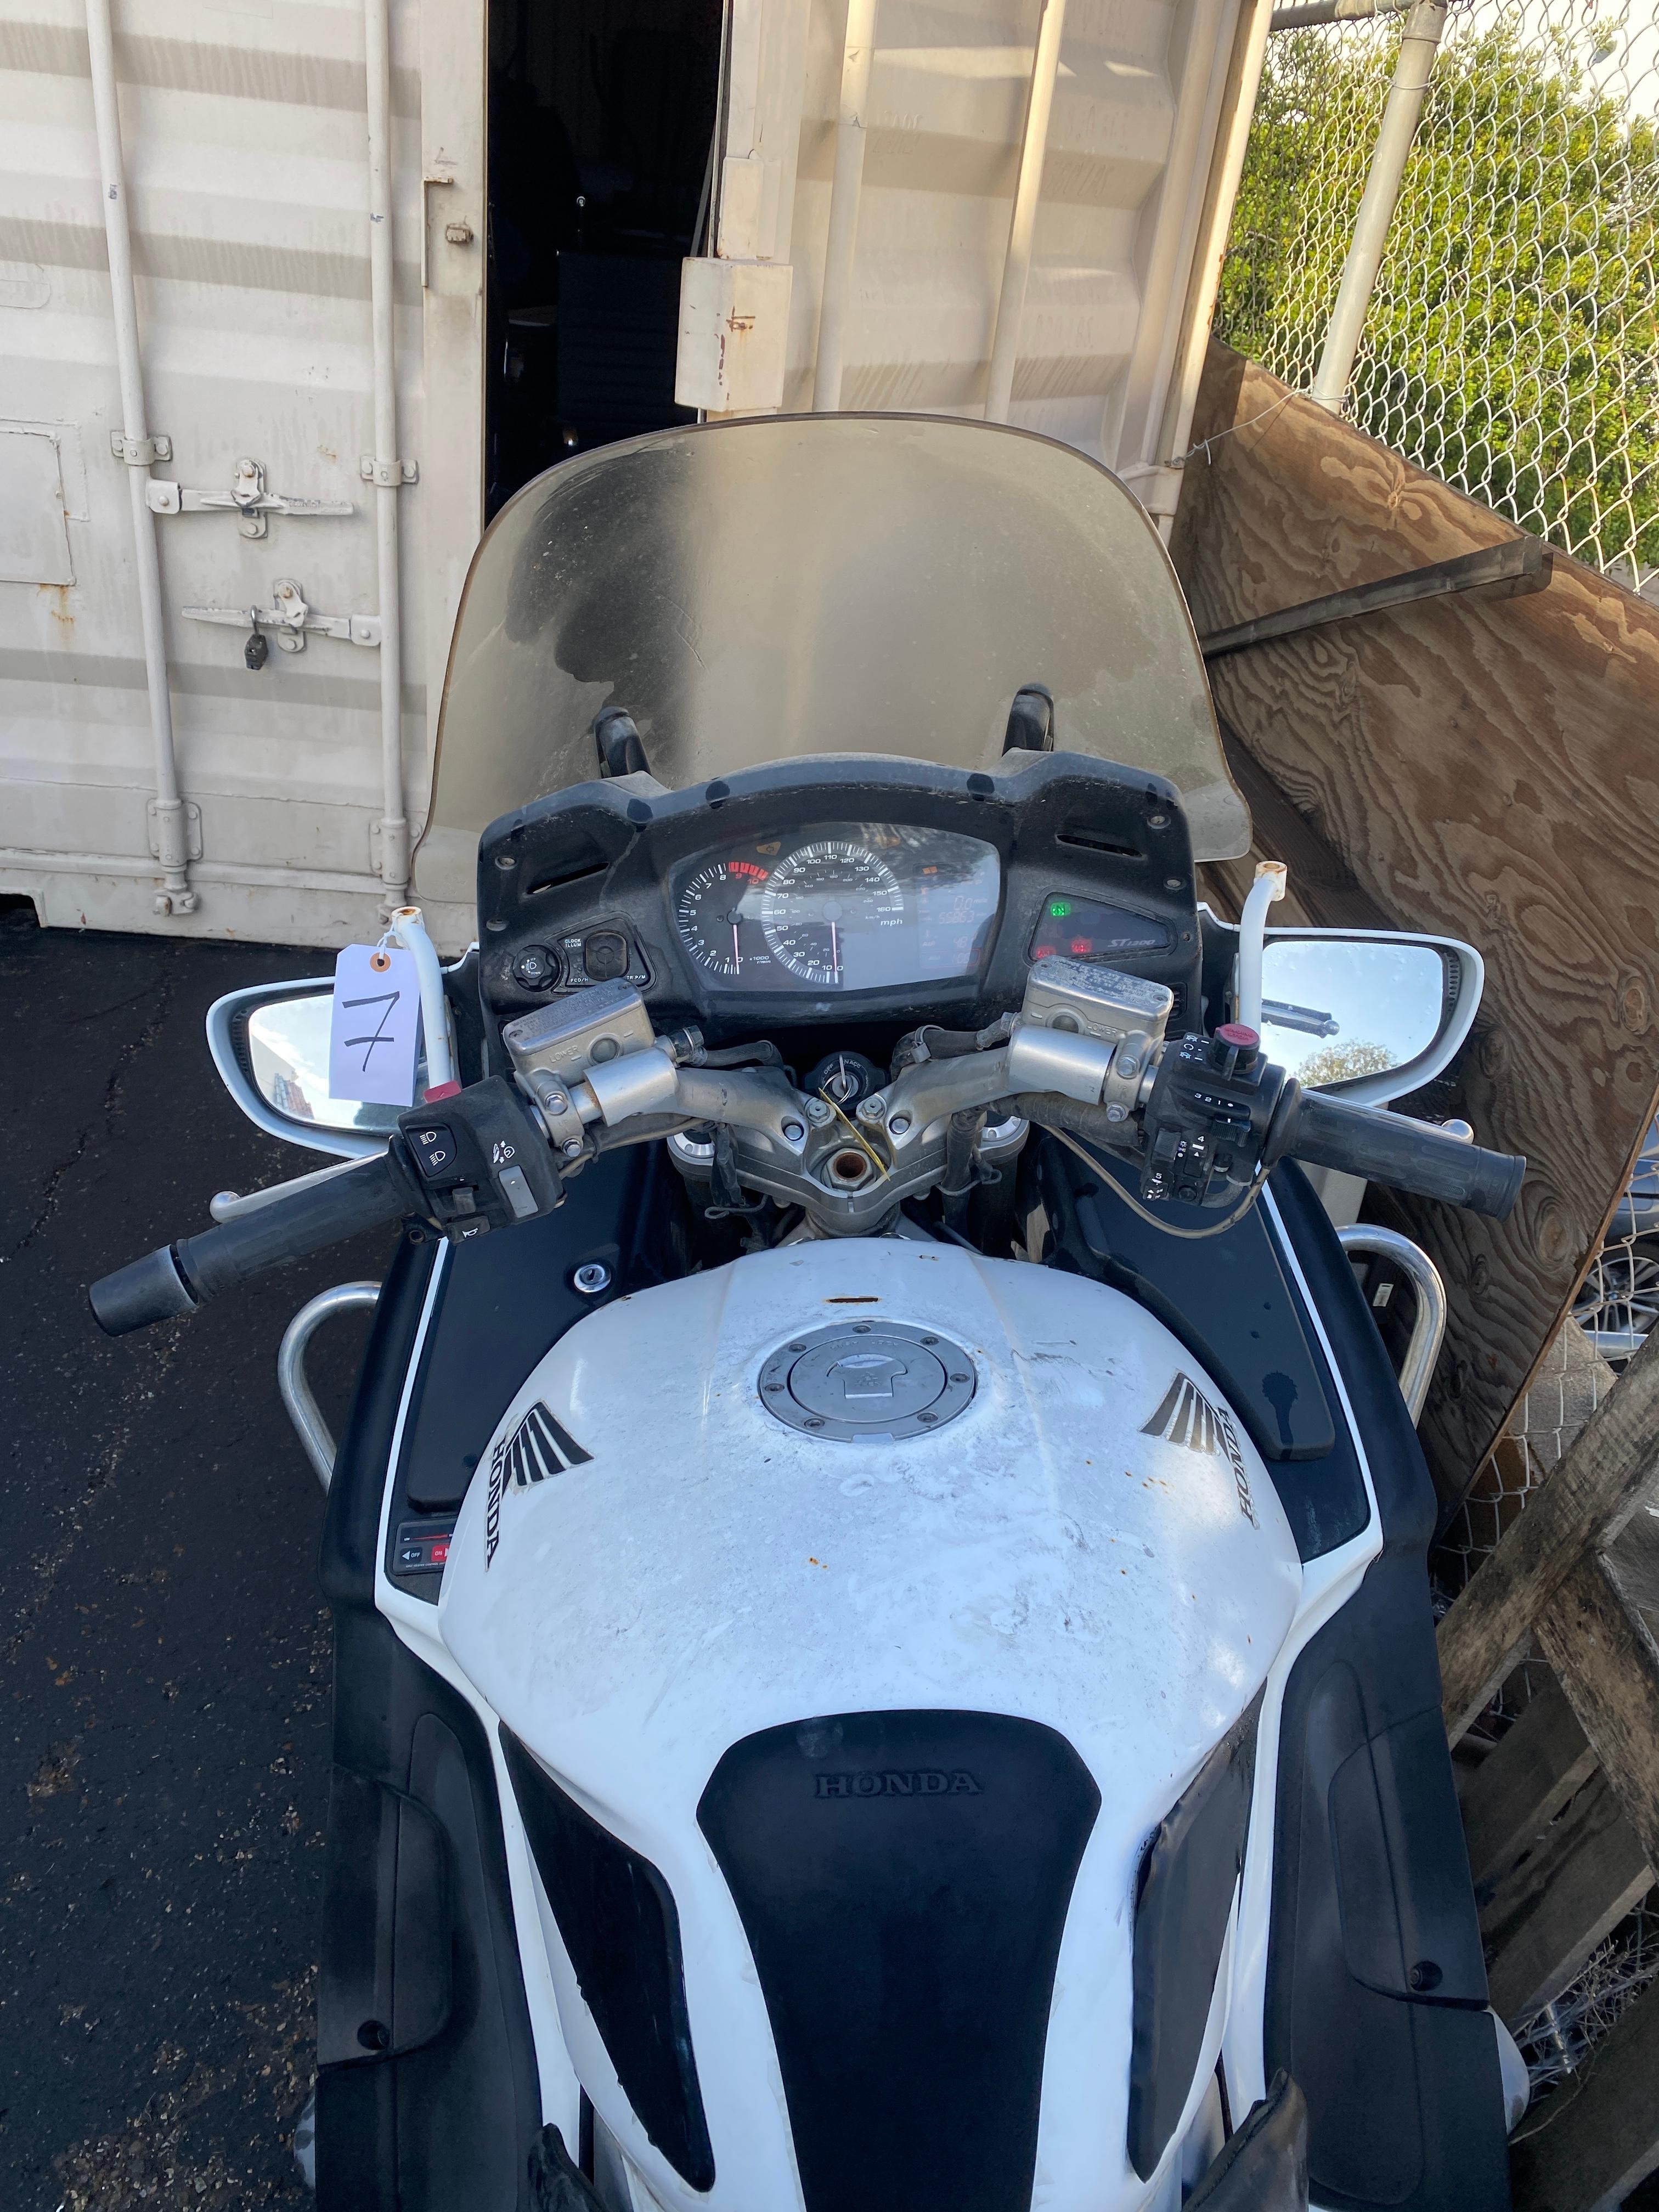 2006 Honda ST1300P Motorcycle - White Color